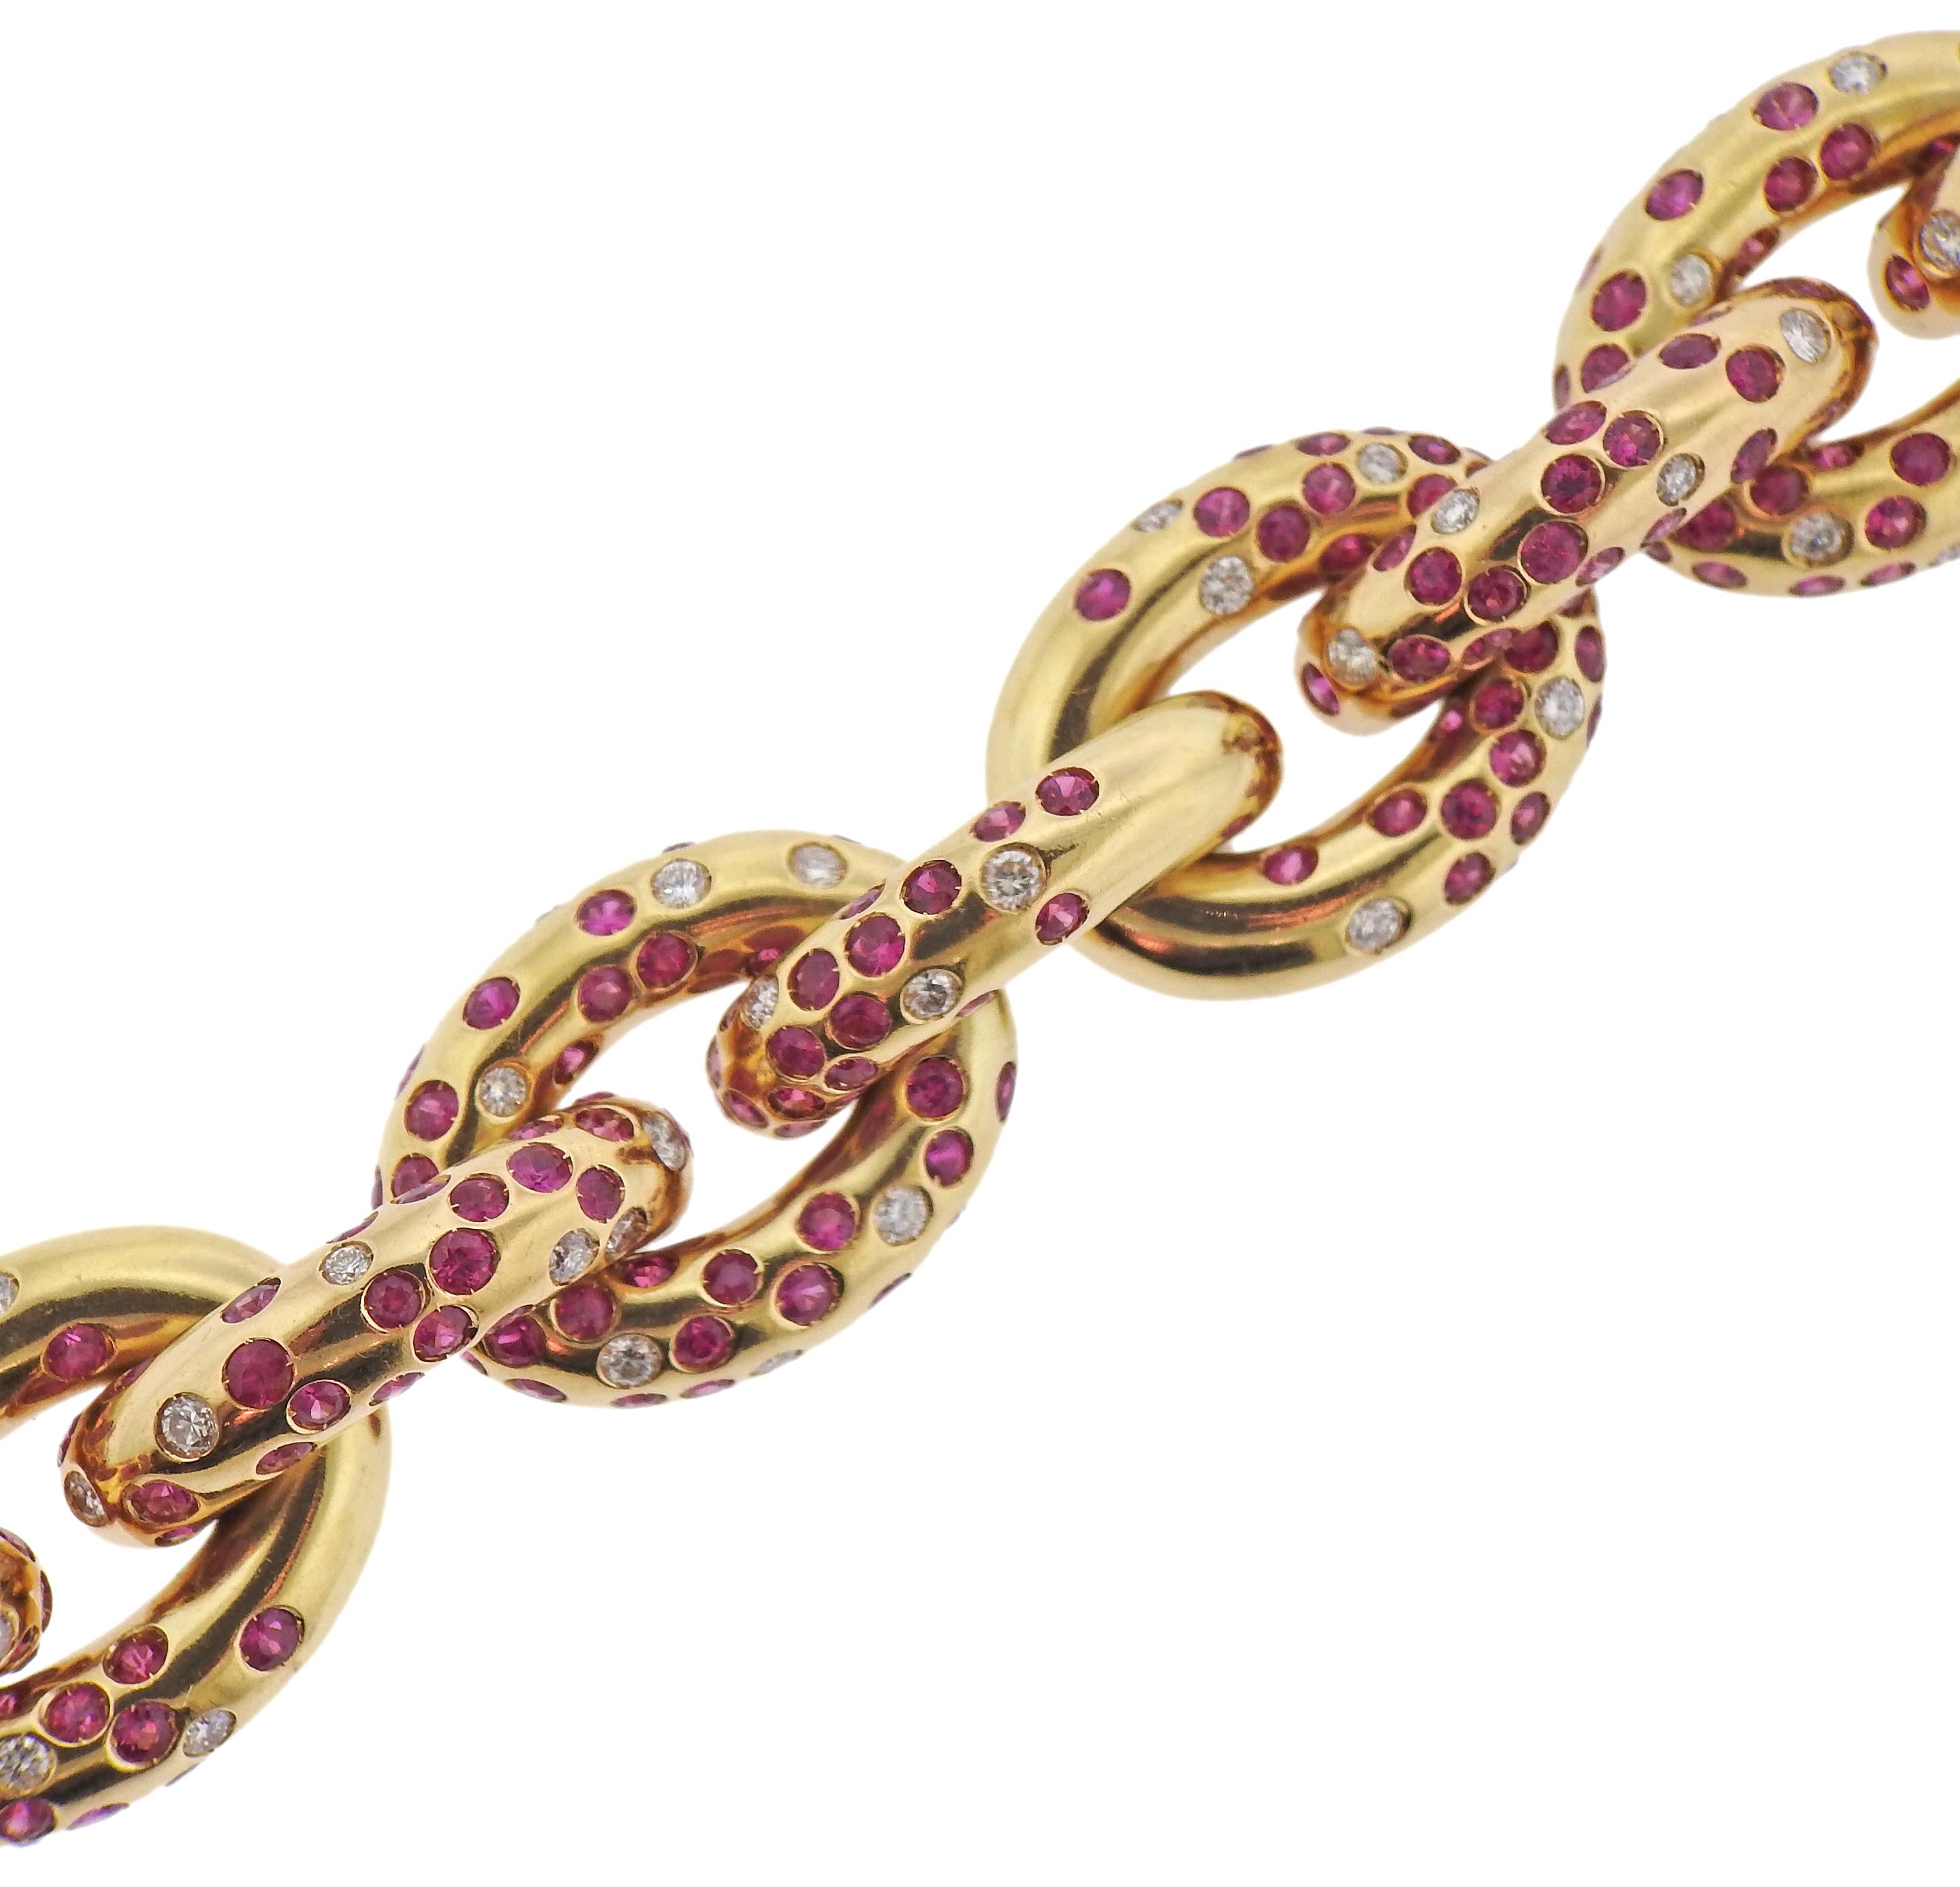 18k yellow gold link bracelet by Cantamessa, with vibrant rubies and approx. 2.00ctw in diamonds. Bracelet is 8